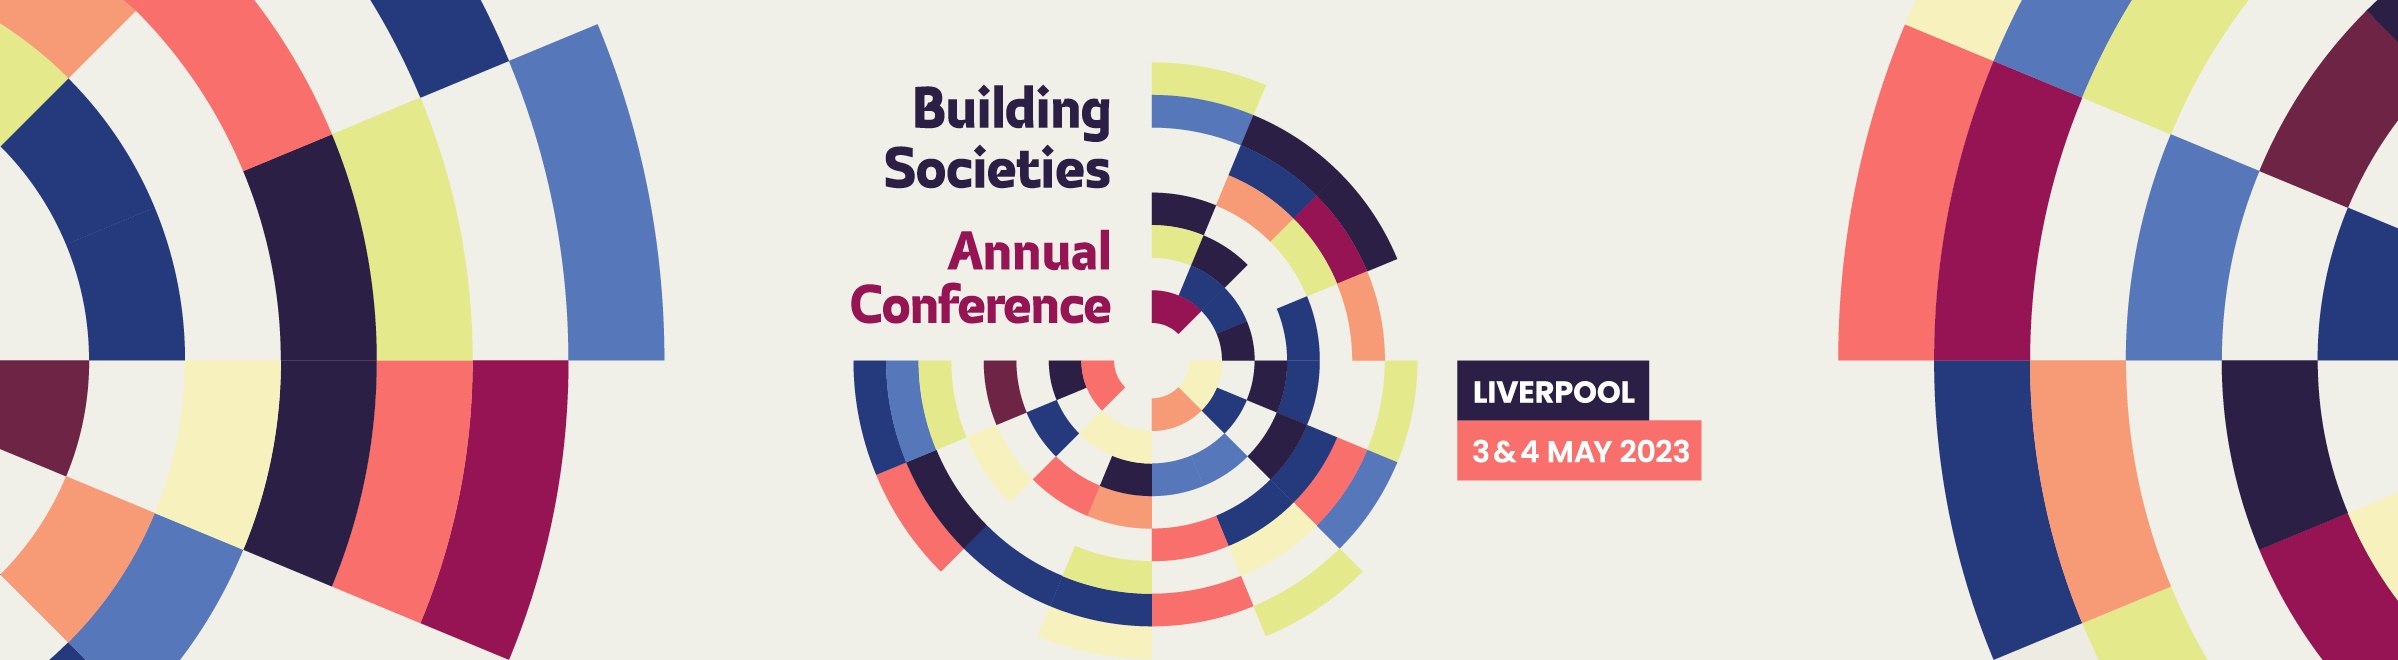 Building Societies Annual Conference 2023